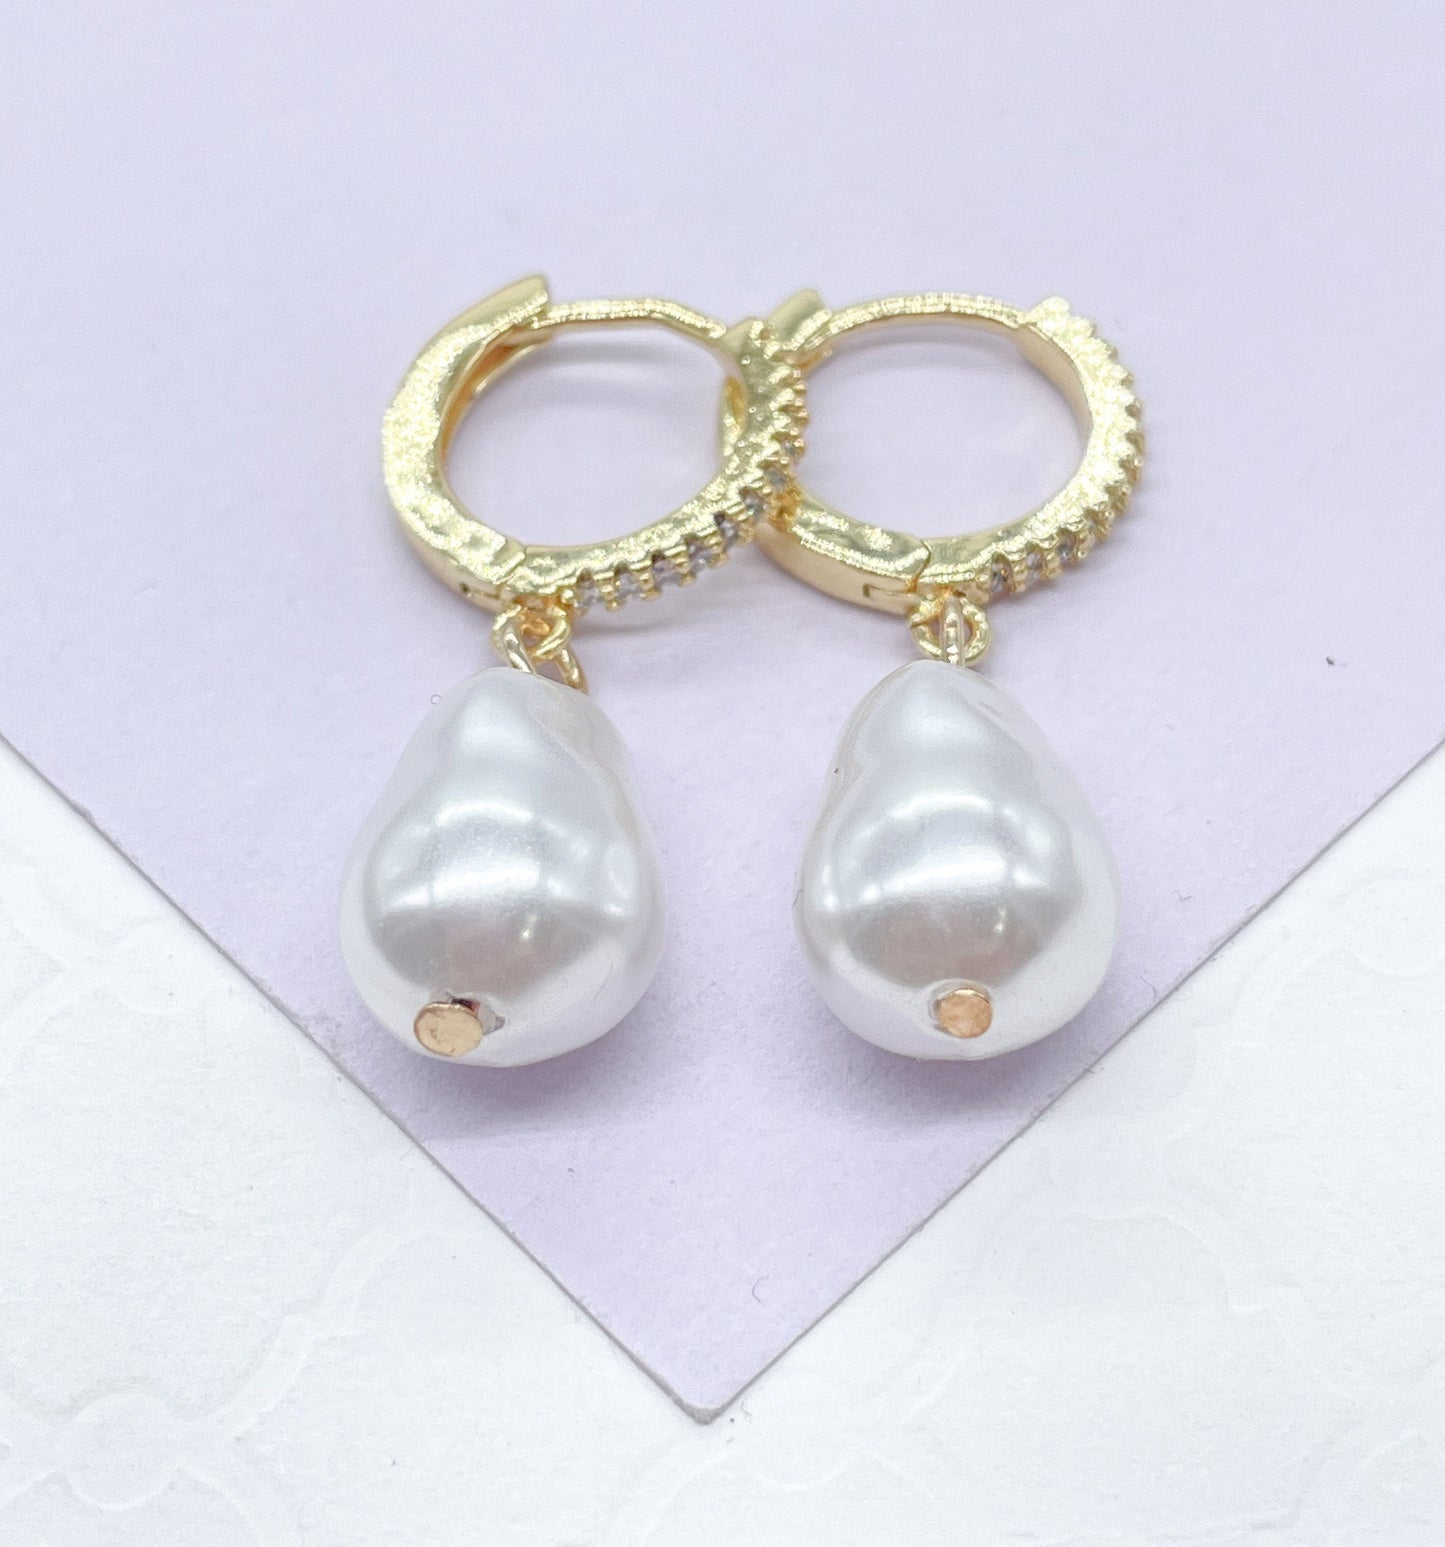 18k Gold Filled Dangling Baroque Pearl With Pave Hoop Earring